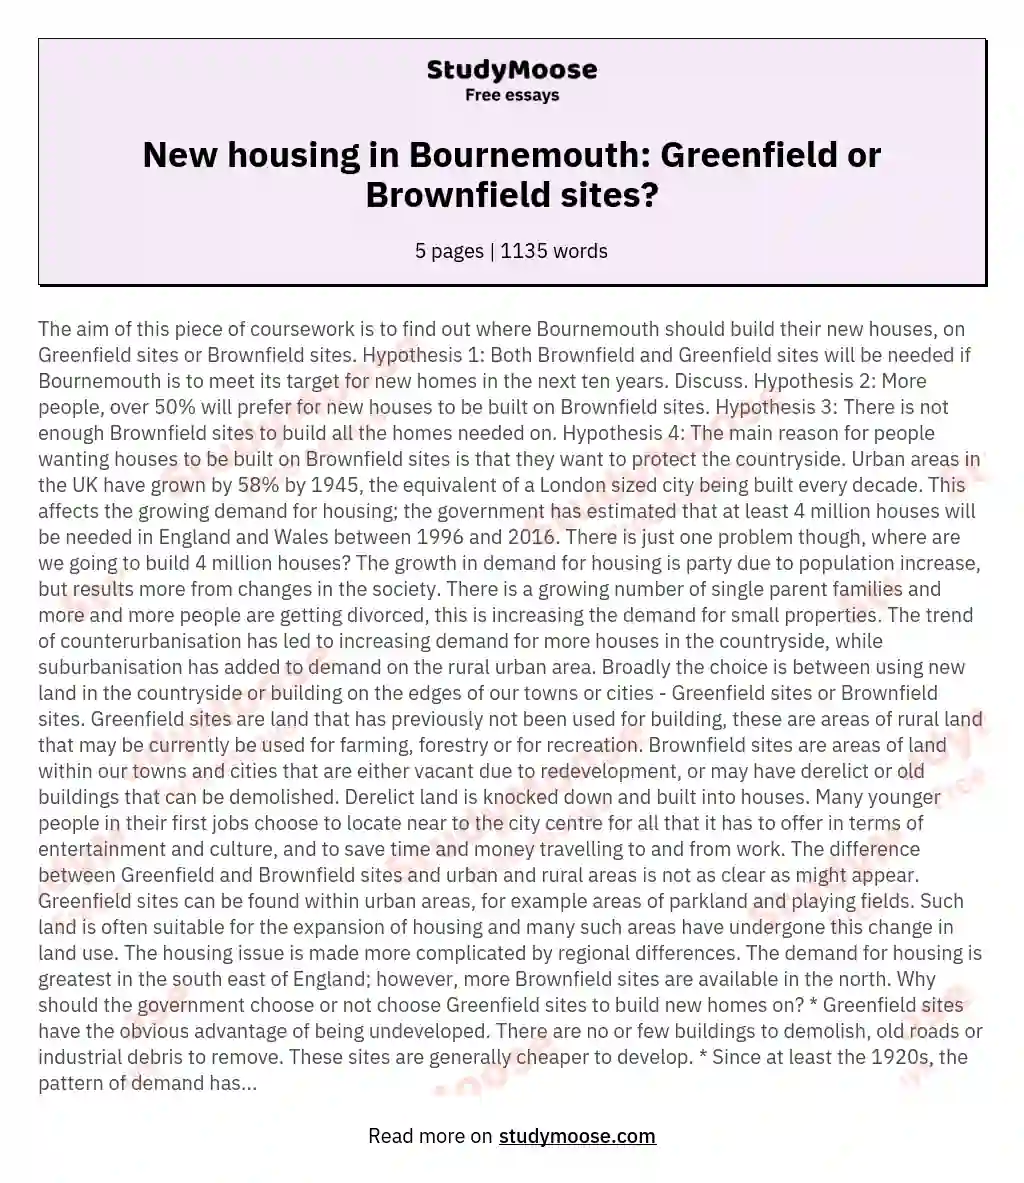 Find out where Bournemouth should build their new houses, on Greenfield sites or Brownfield sites